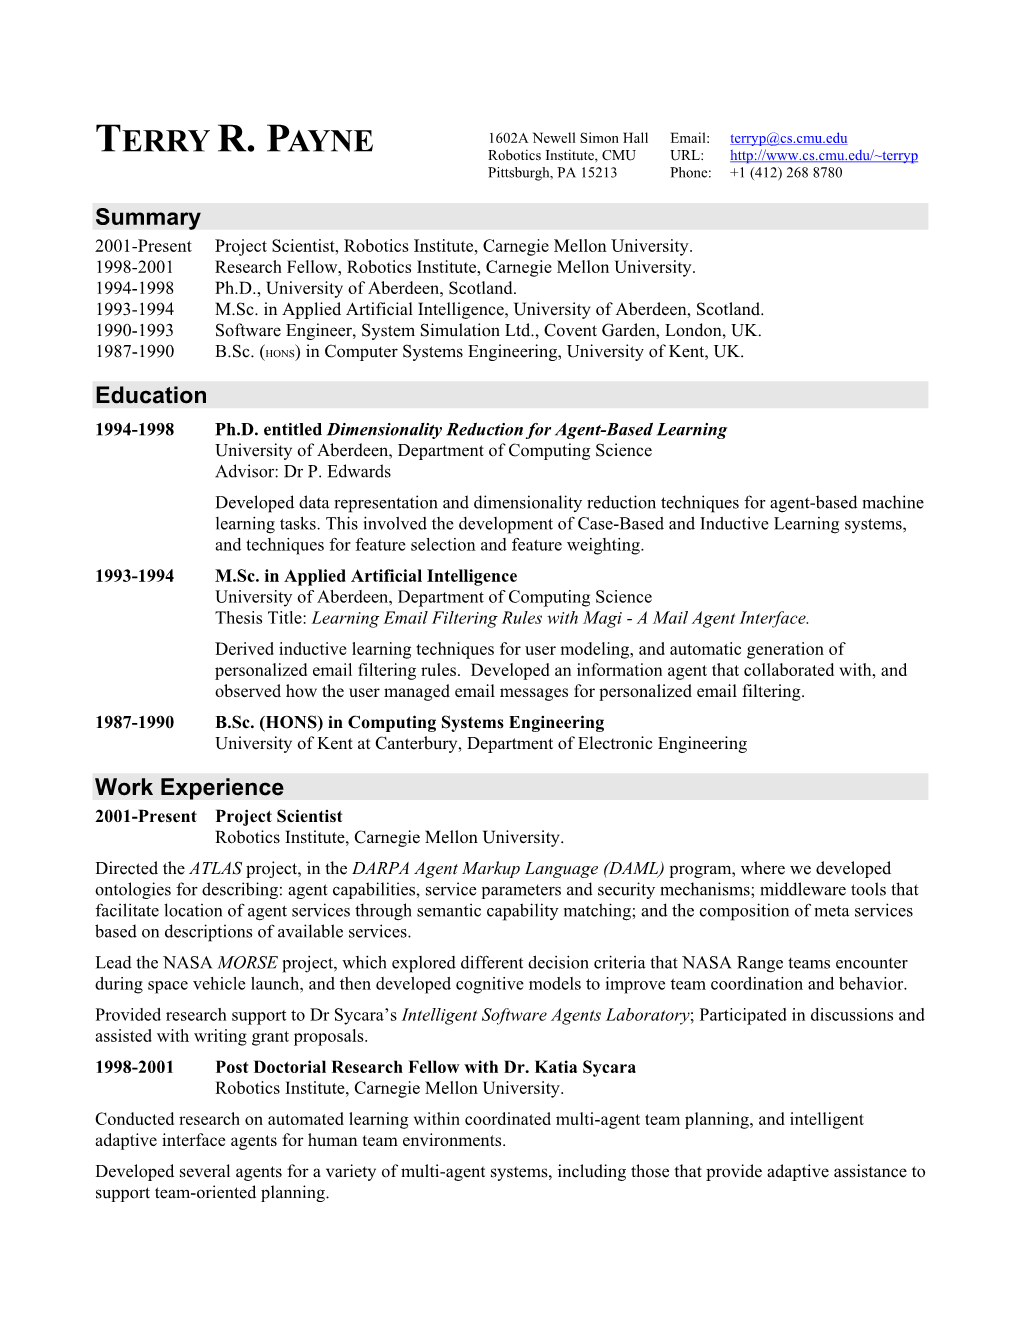 Resume for Terry R Payne